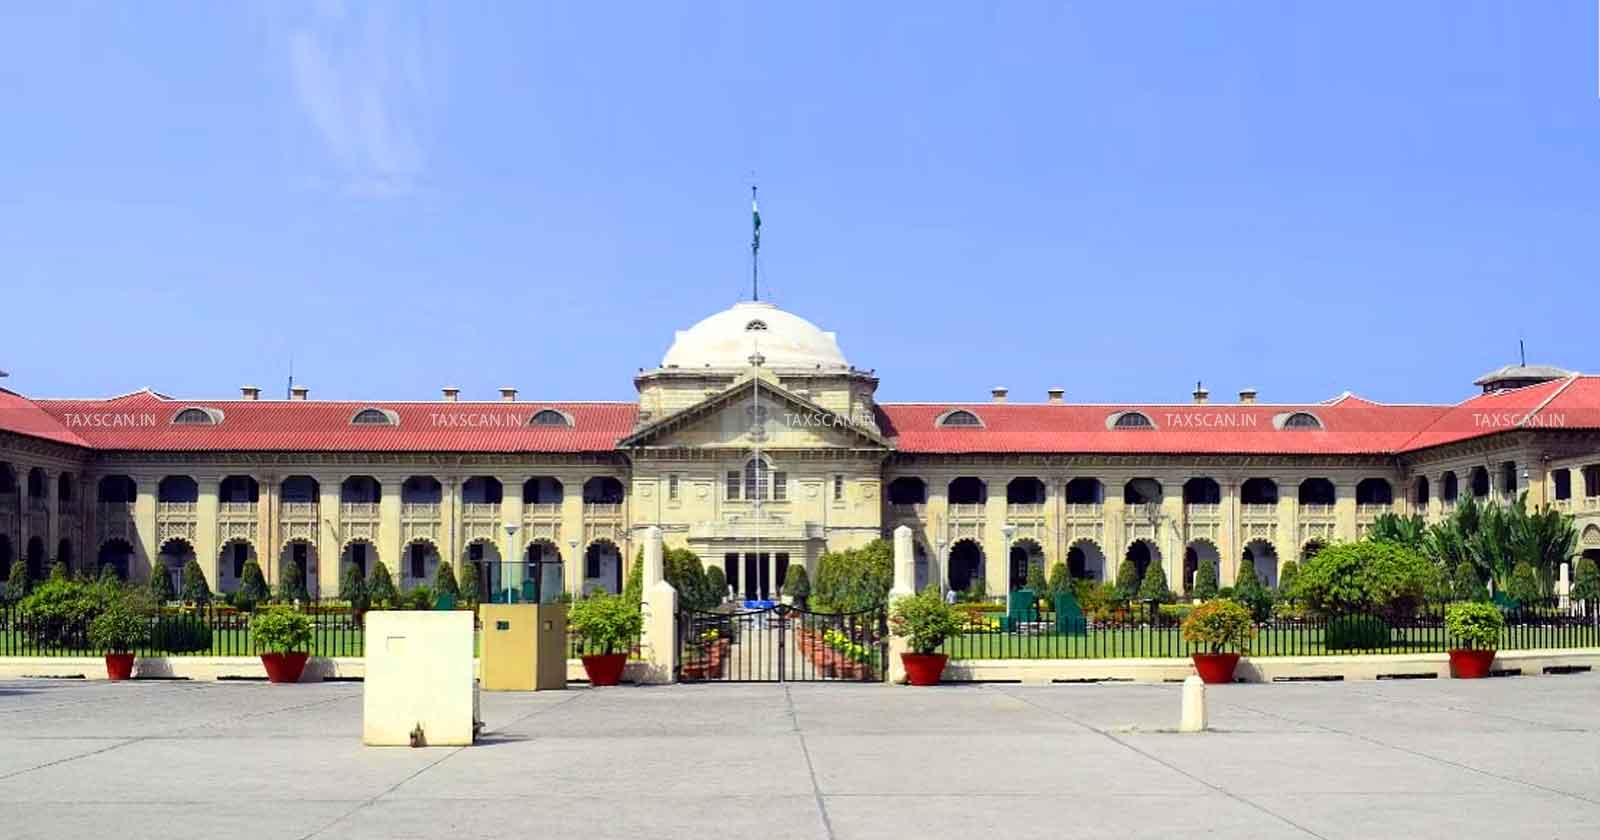 The Allahabad High Court in the case of revision application under section 58 of the Uttar Pradesh (UP)Value Added Tax Act